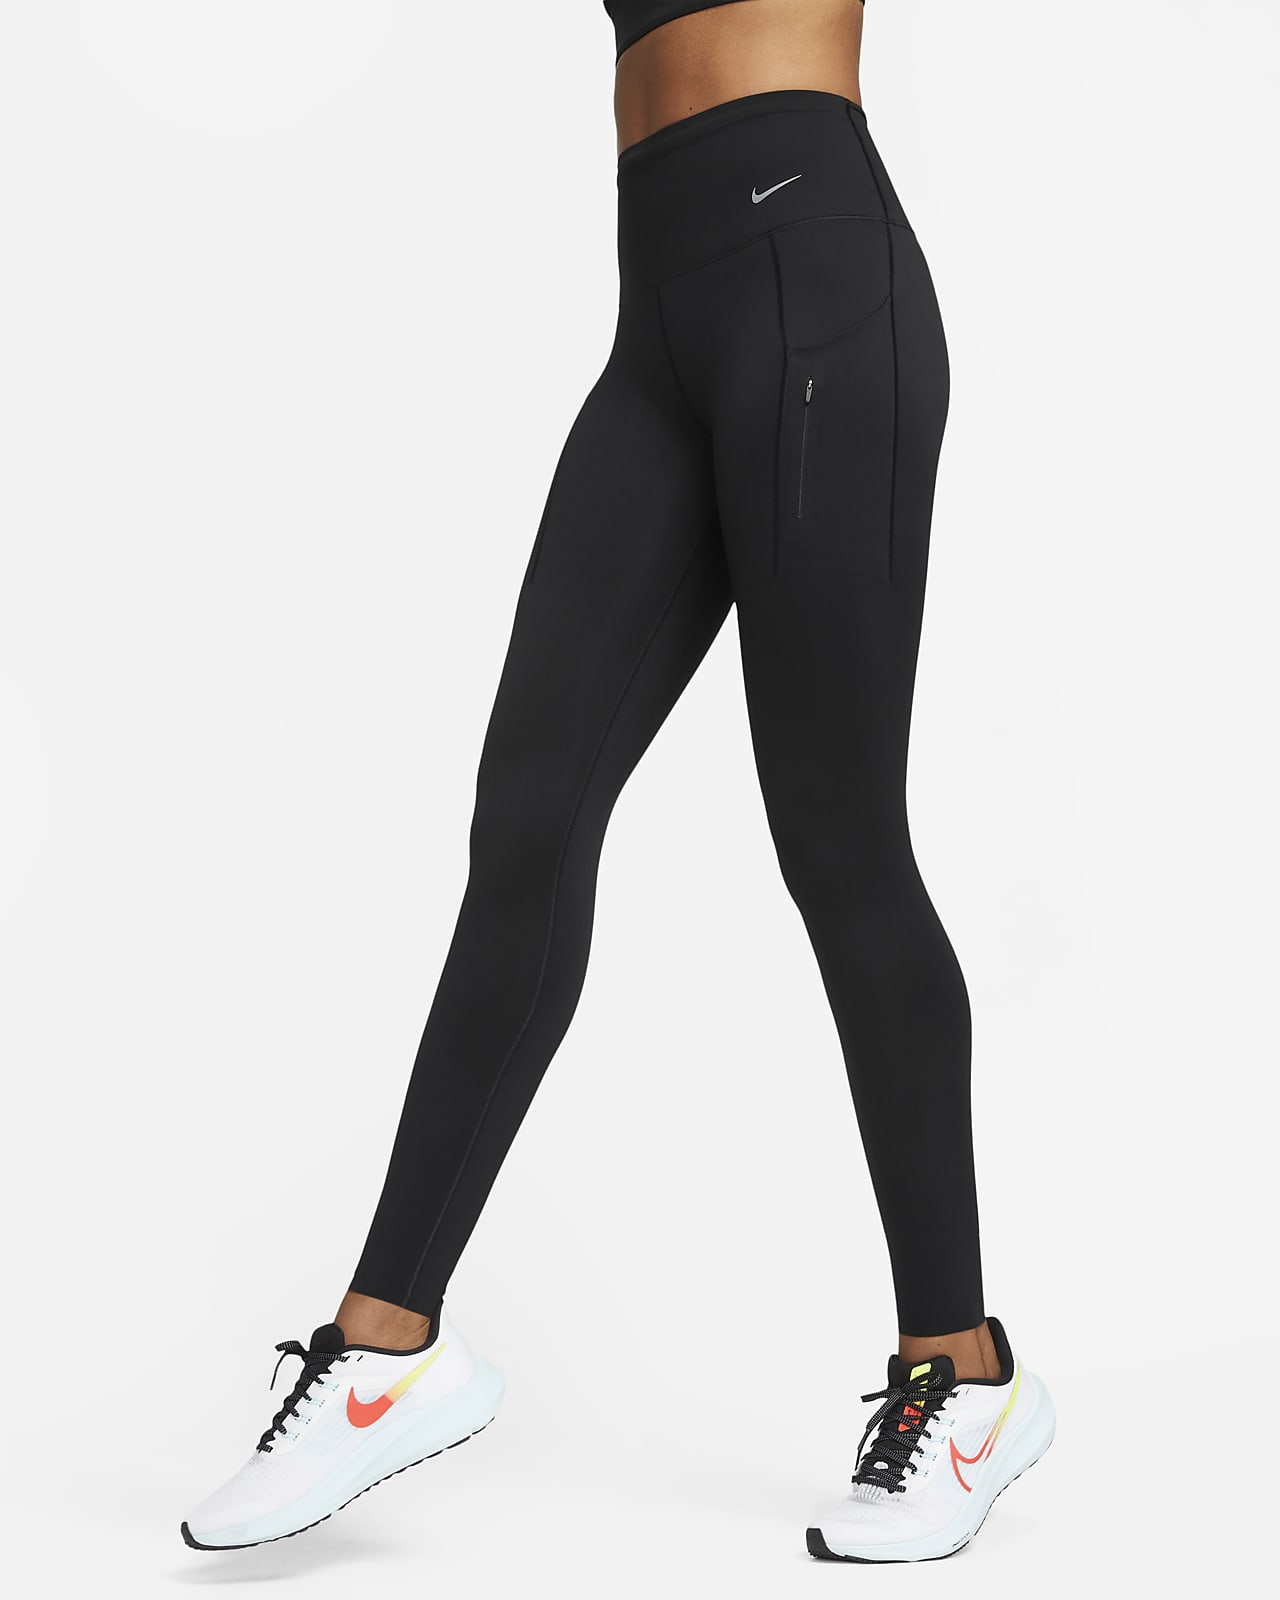 Update more than 181 nike running pants with pockets best